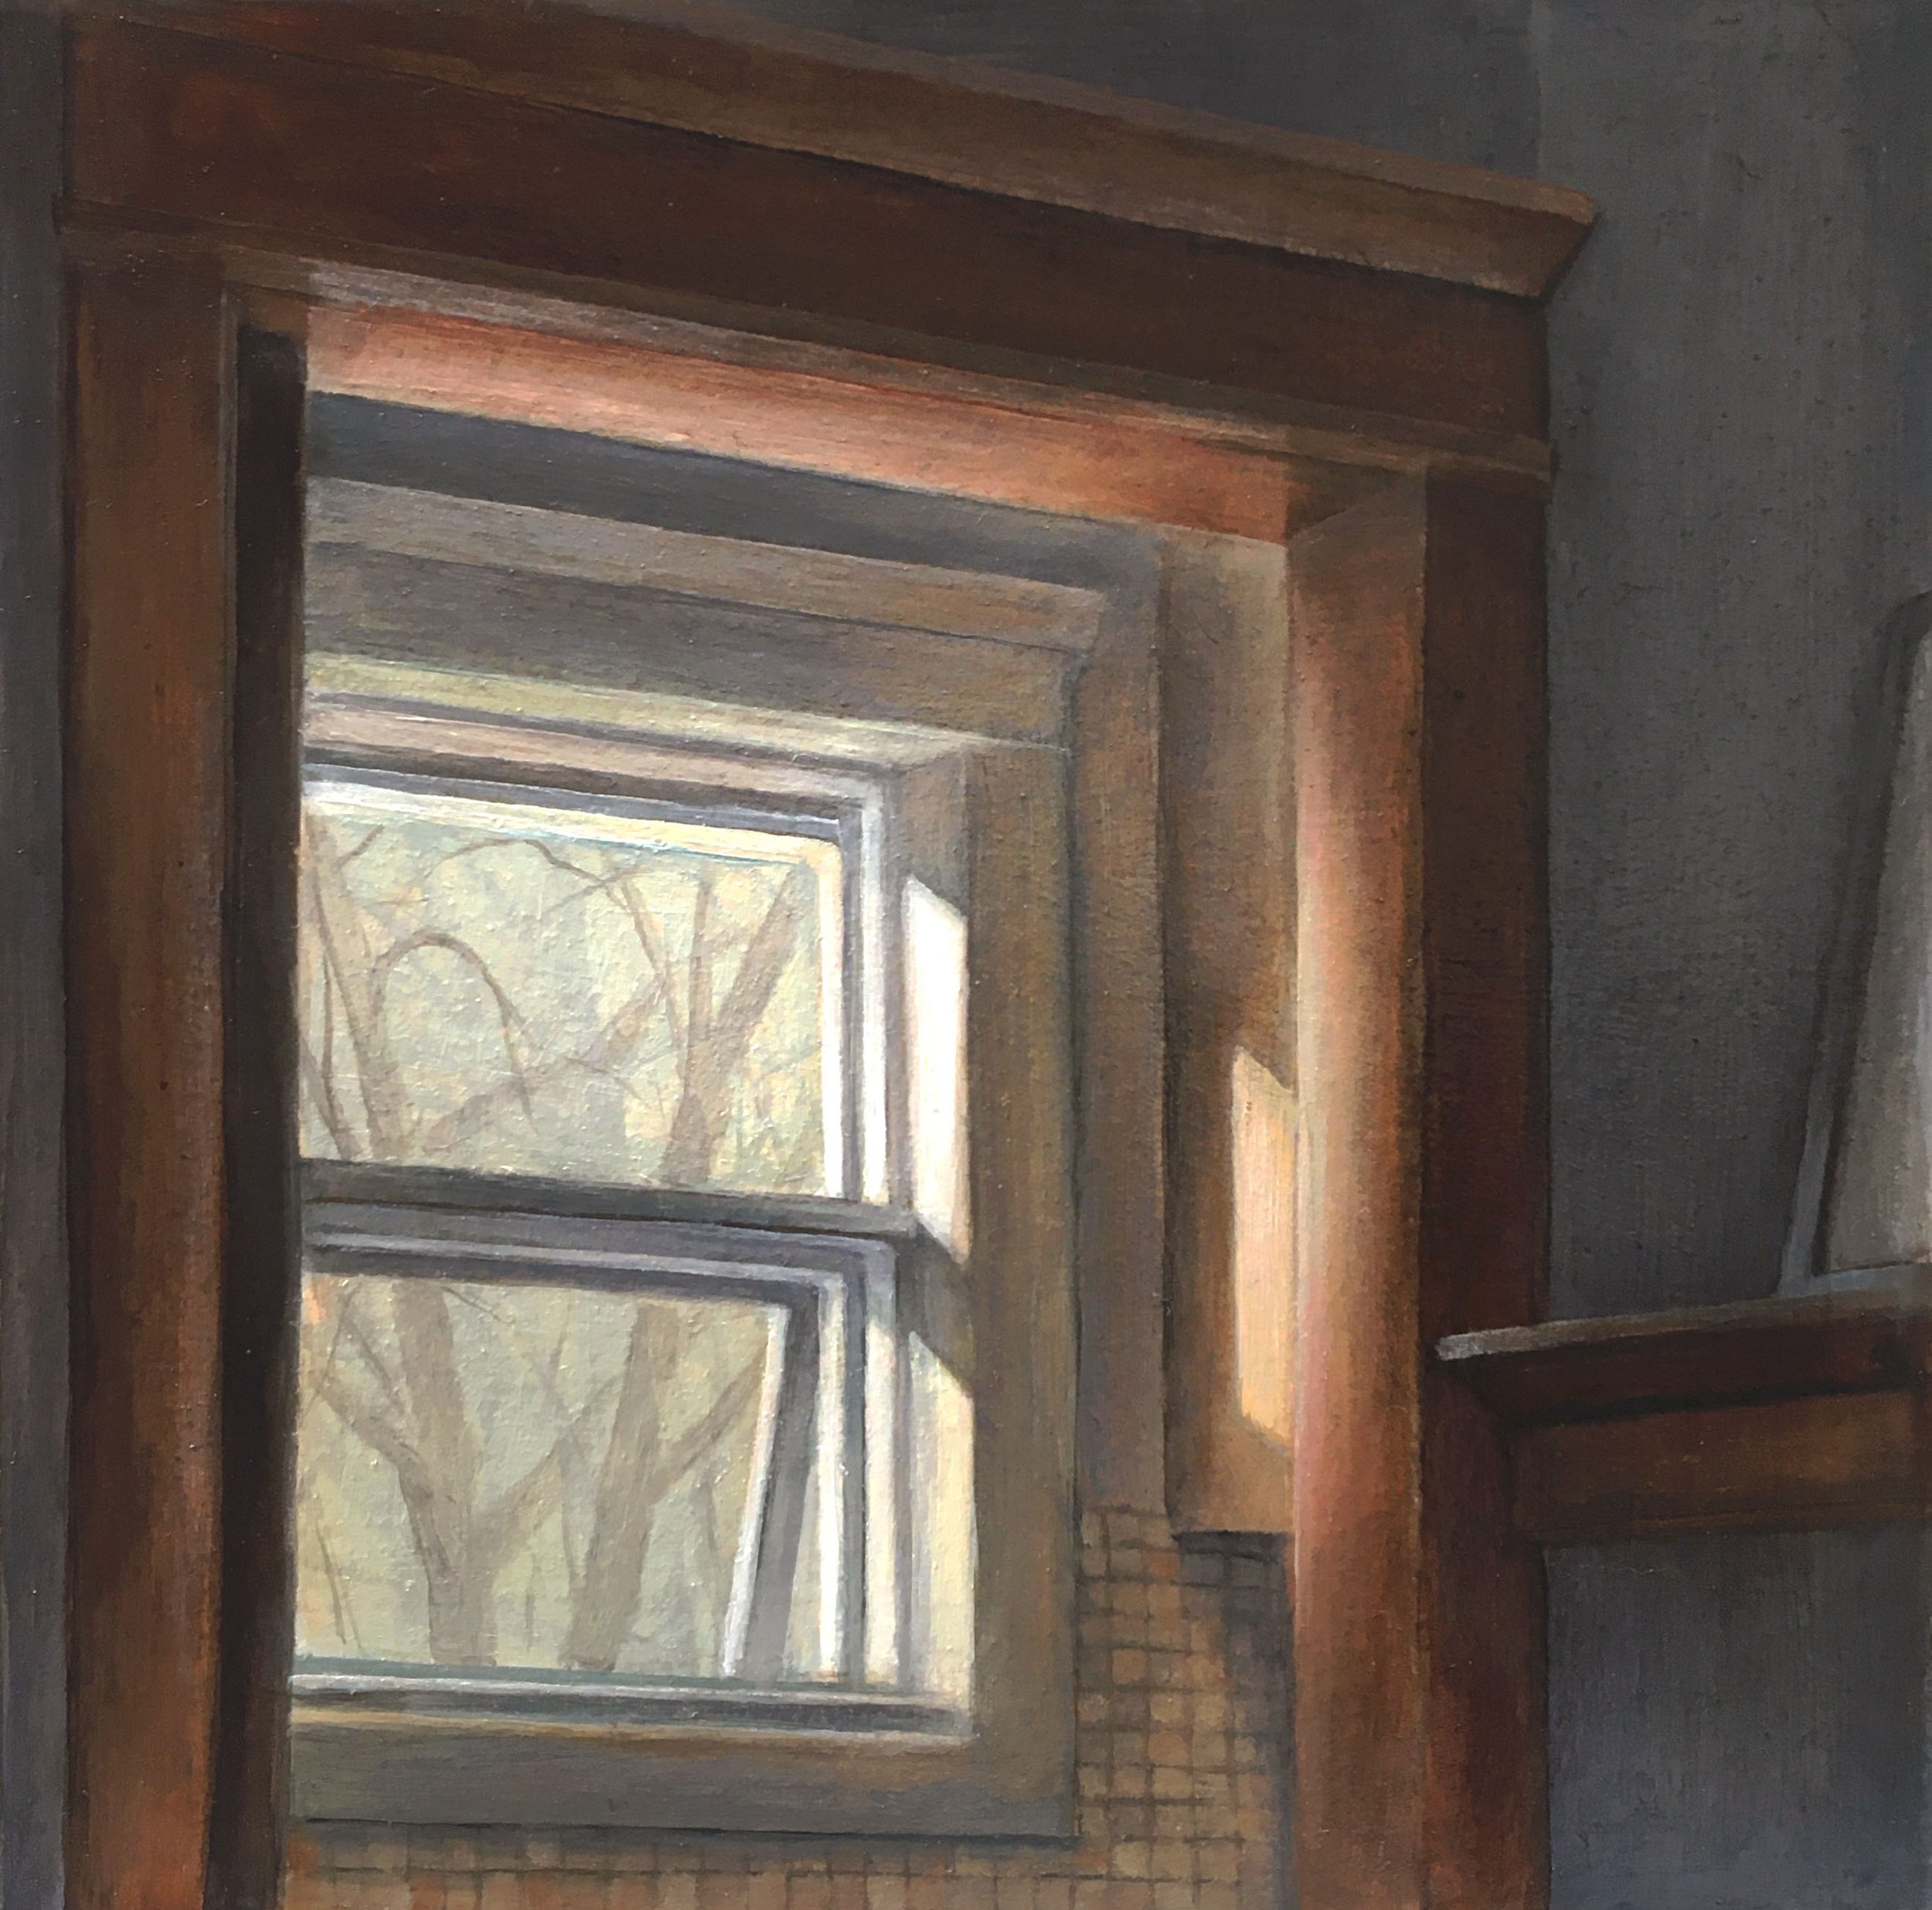   Afternoon Light through Kitchen Window   2022  Oil on gessoed paper  7 x 7 inches   